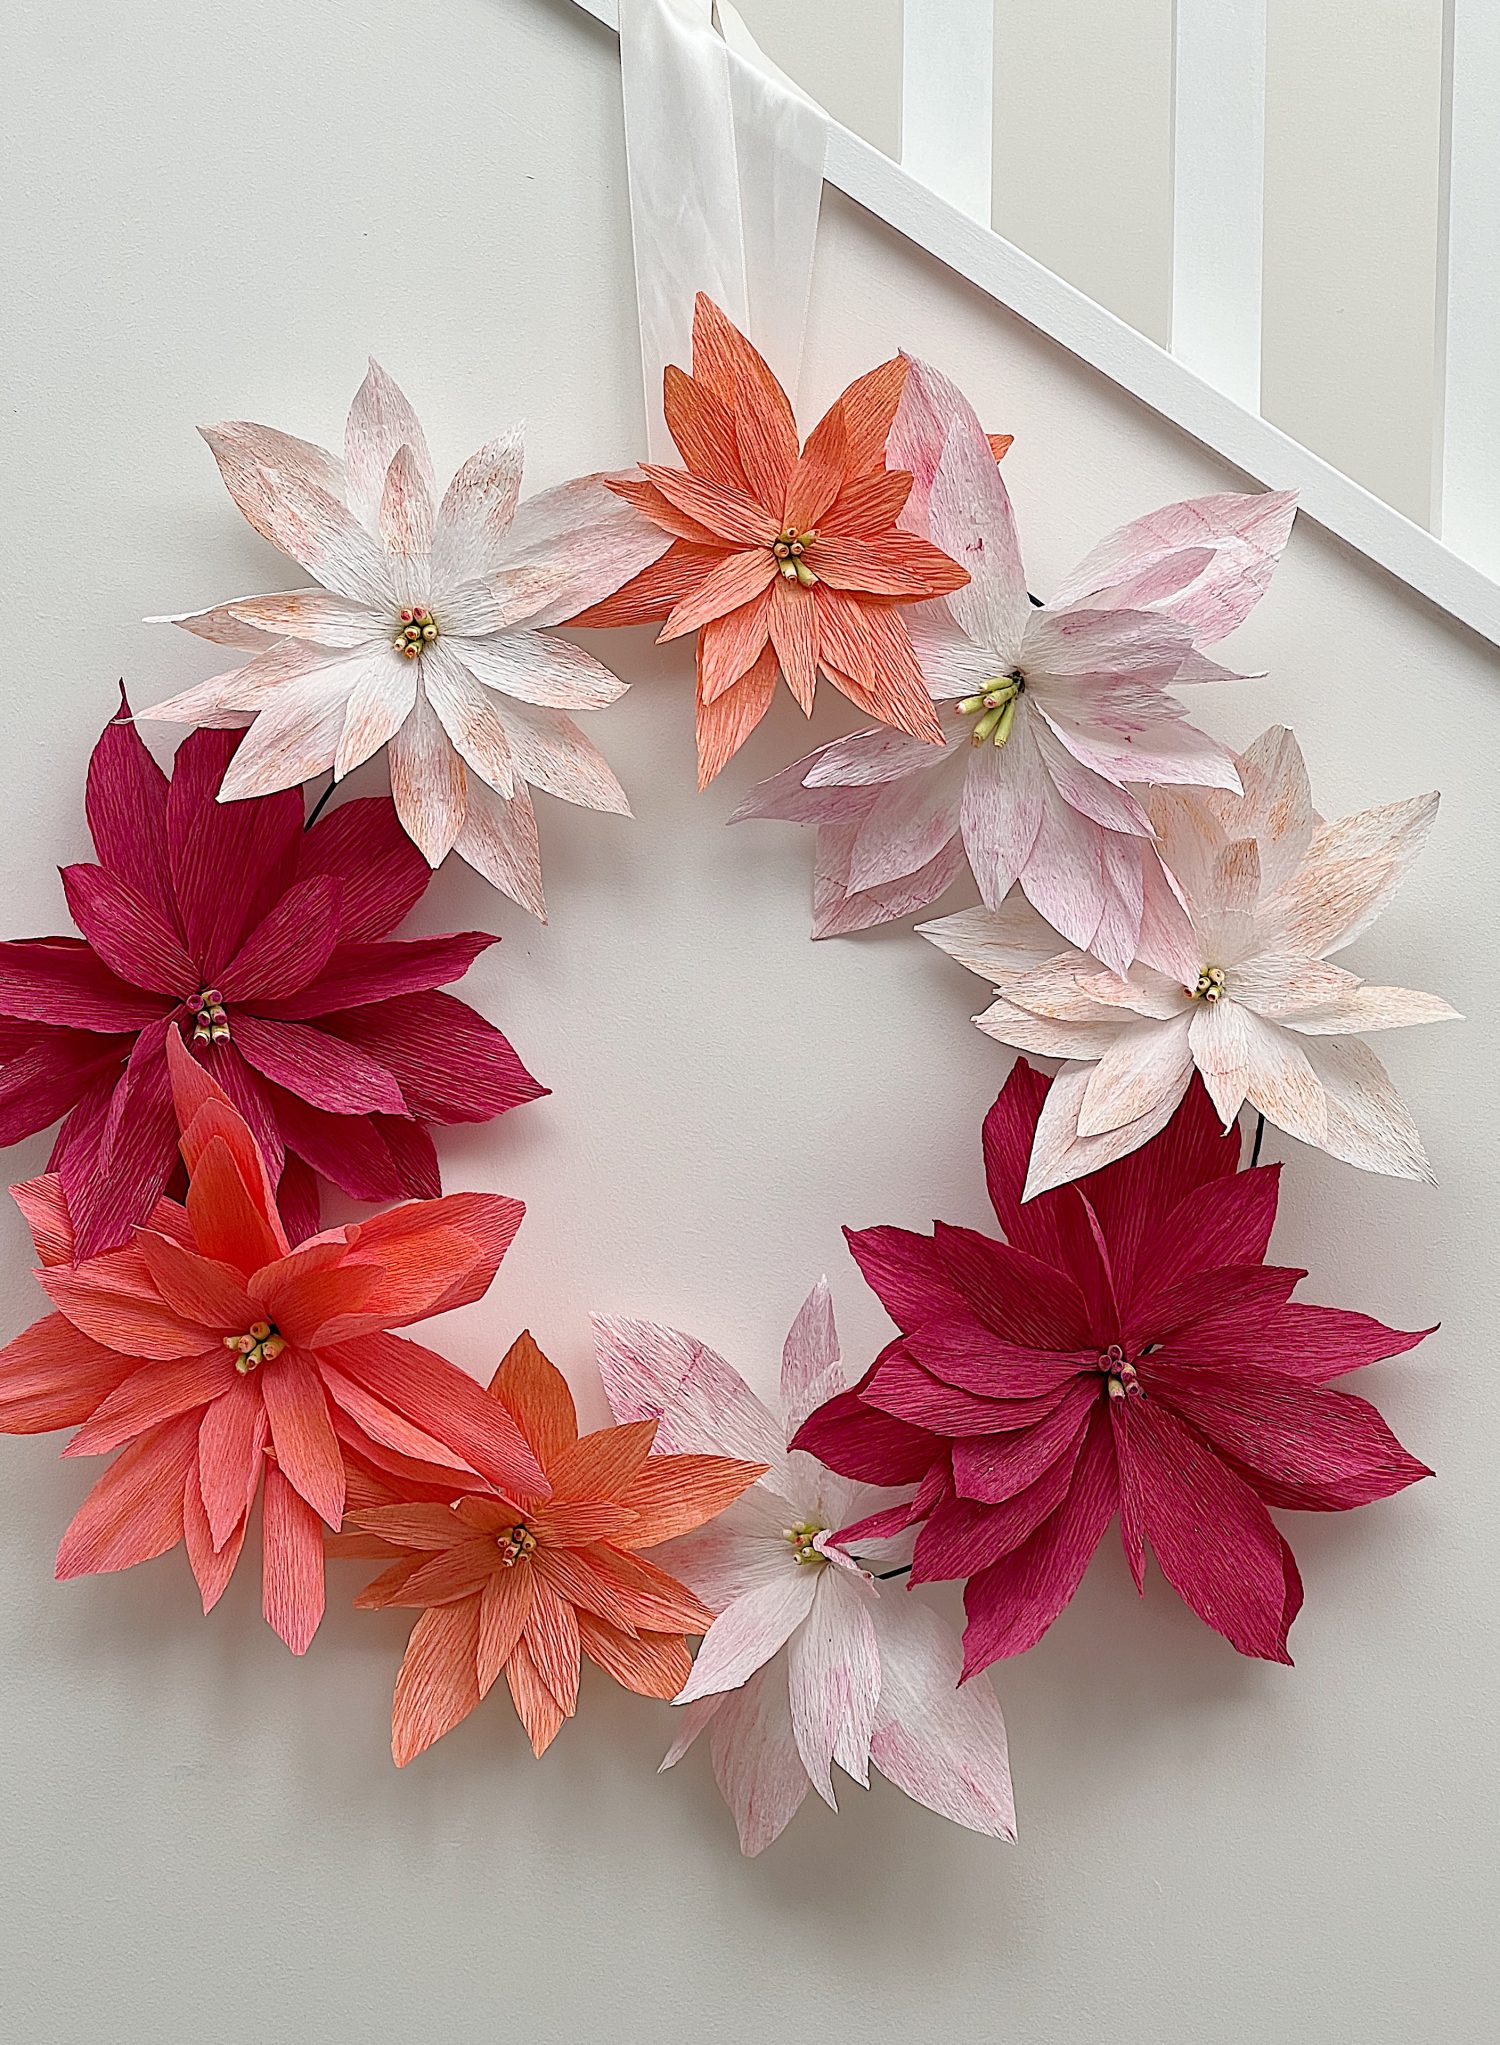  Easy Do It Yourself Paper Flower Craft Kit, Makes 3 Paper  Flowers, Easy for Children and Adults to Do : Home & Kitchen